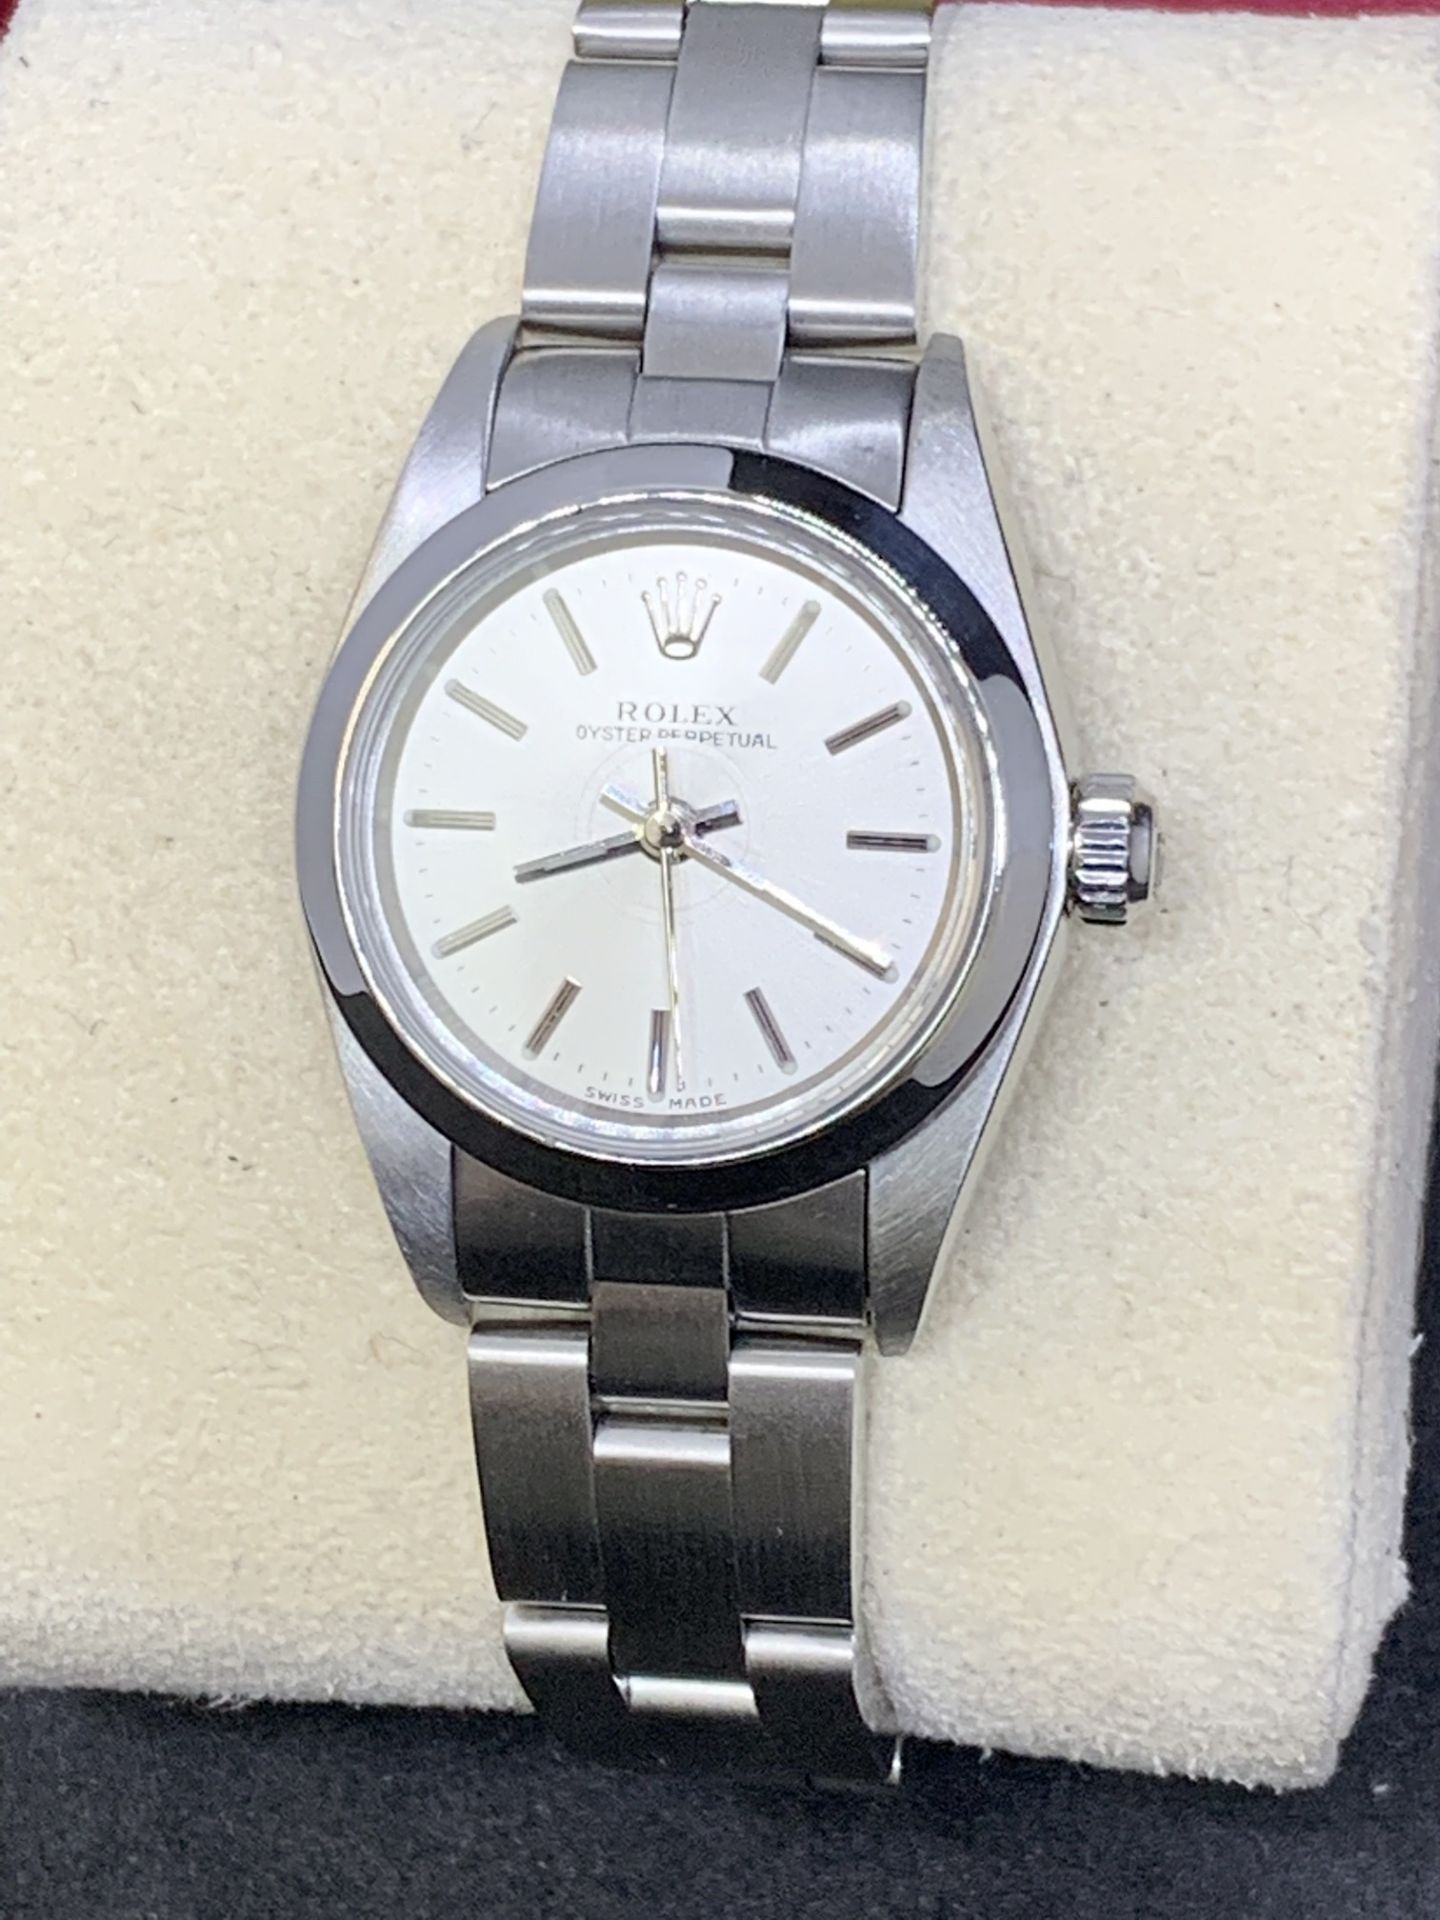 ROLEX STAINLESS STEEL WATCH - Image 2 of 11